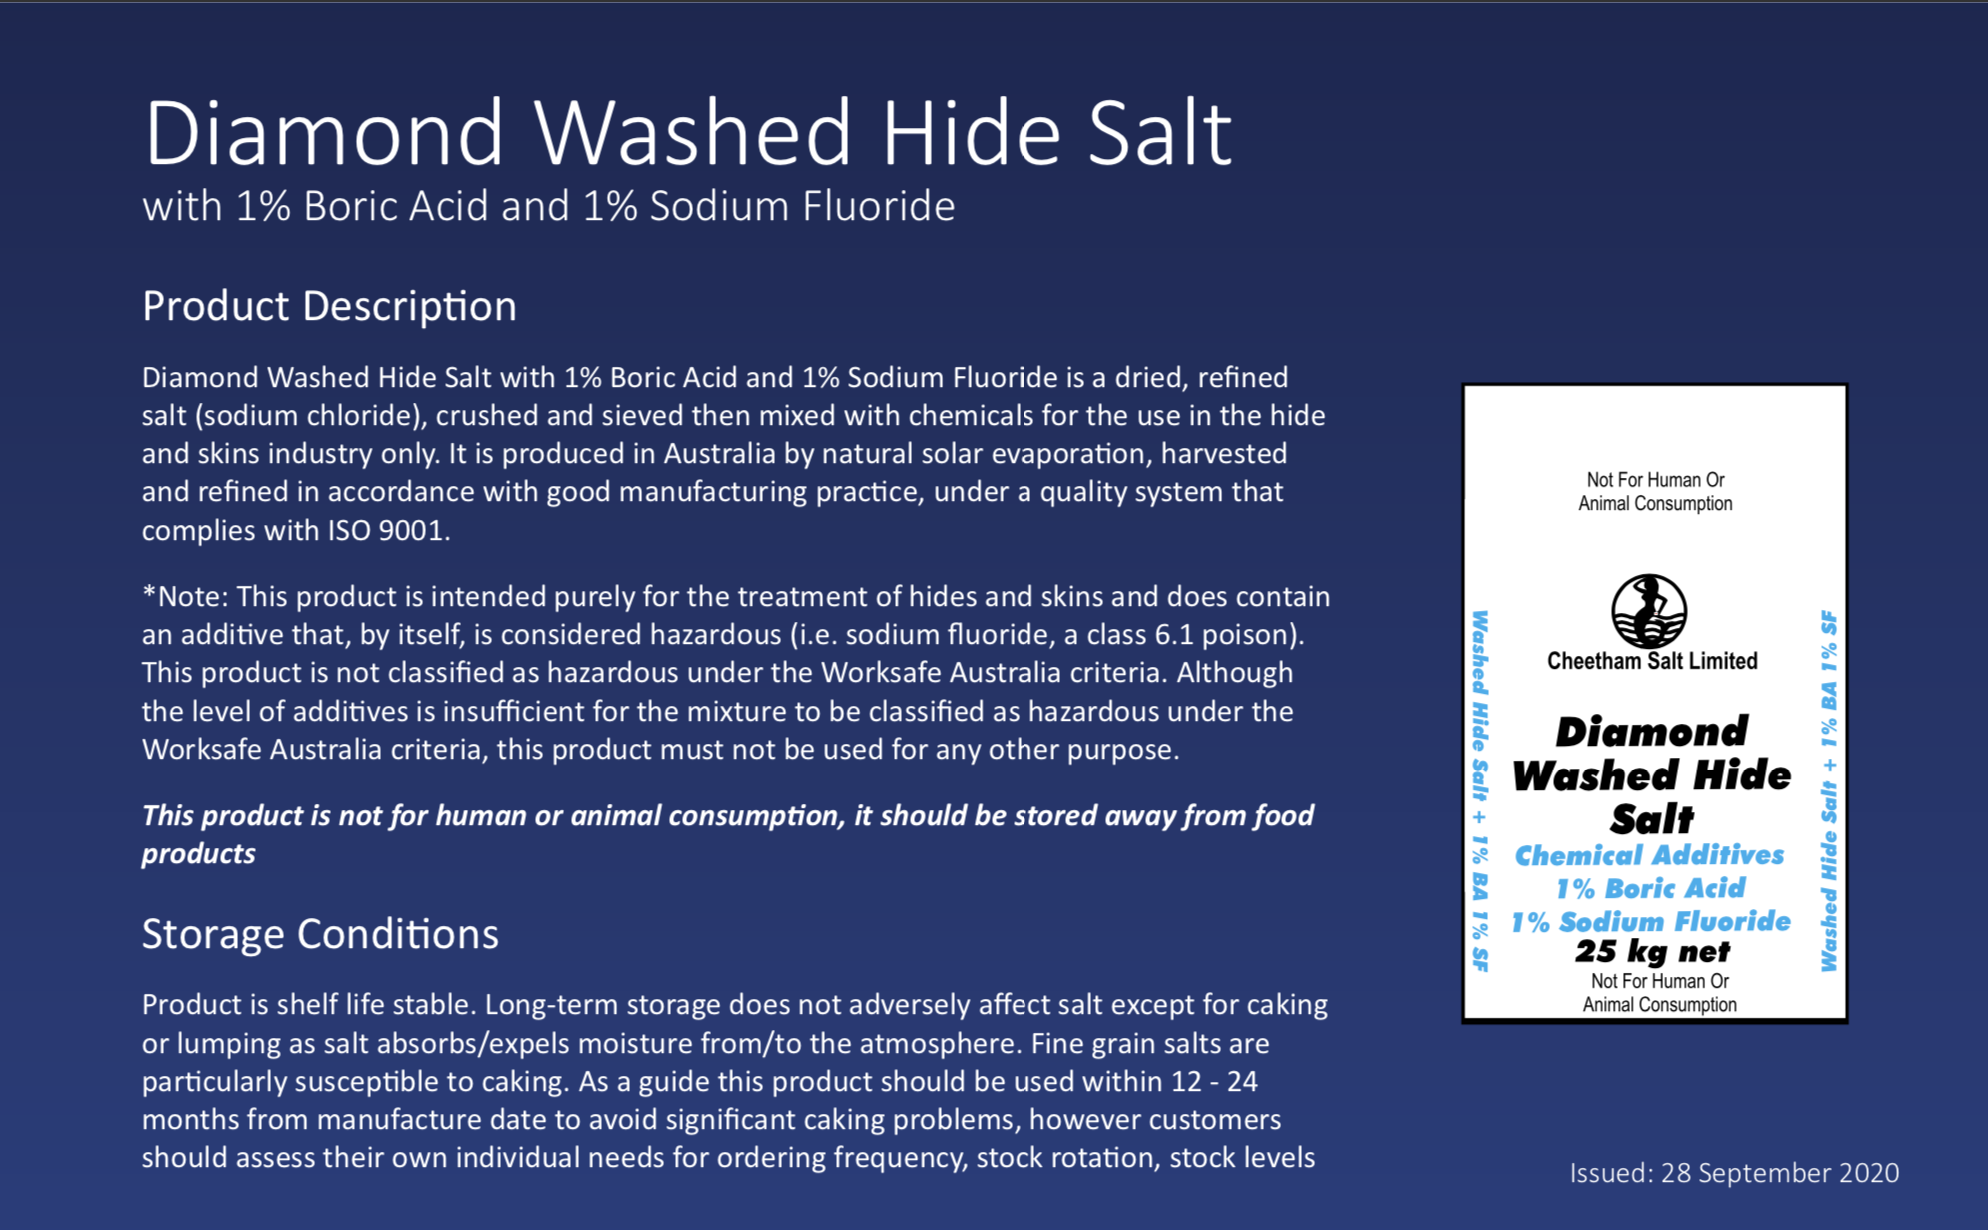 Diamond Washed Hide Salt product description. The product description includes information about storage as well as an image of the product.